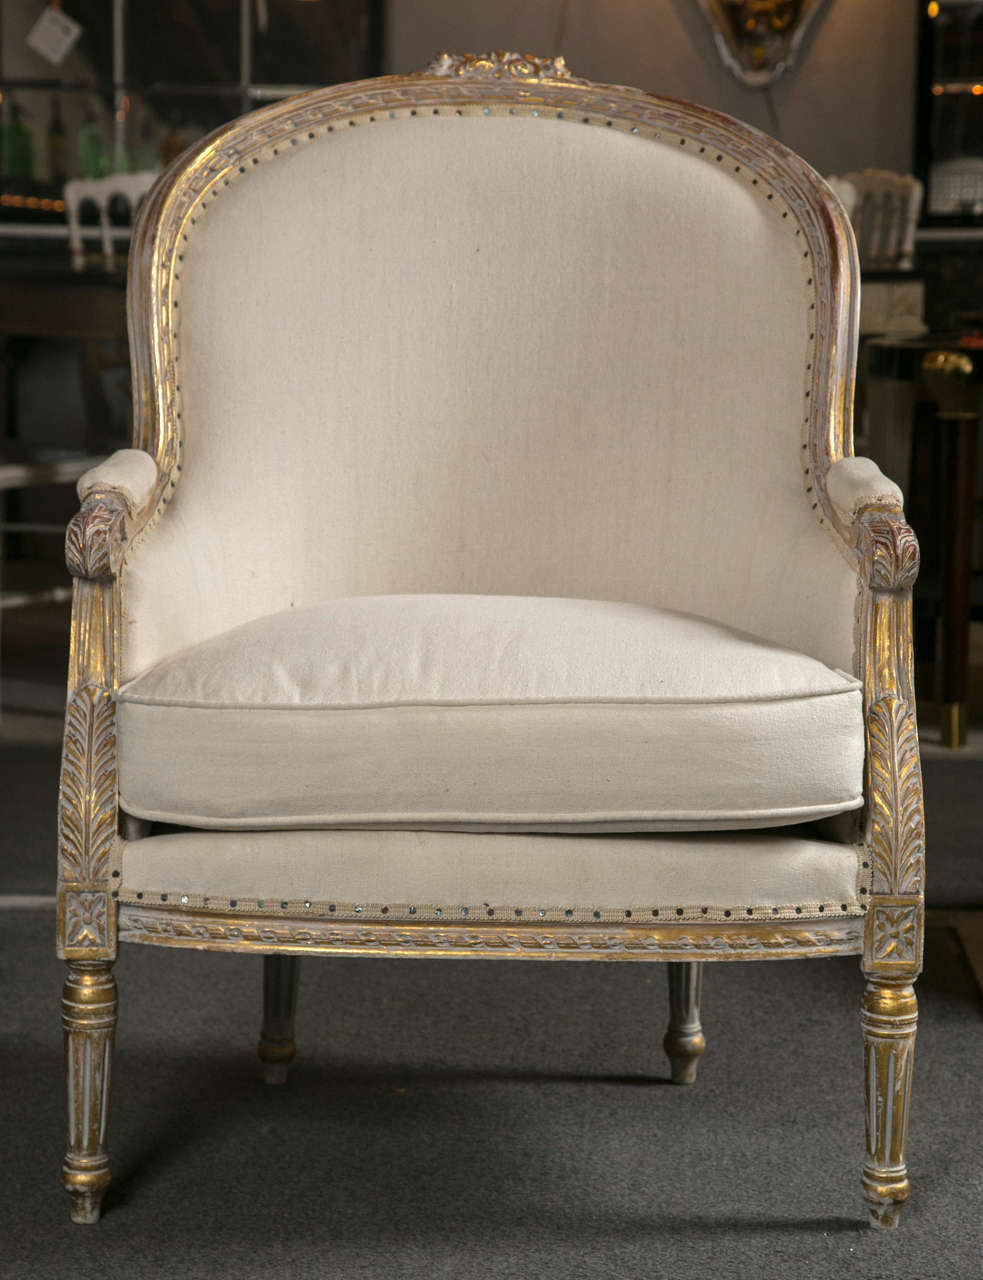 Pair of elegant and ample French bergere chairs in the Directoire style, circa 1940s with later upholstery, the fine quality and gorgeous grey blue painted and parcel gilt frame depicting patera and acanthus motifs, padded back and arms joint by